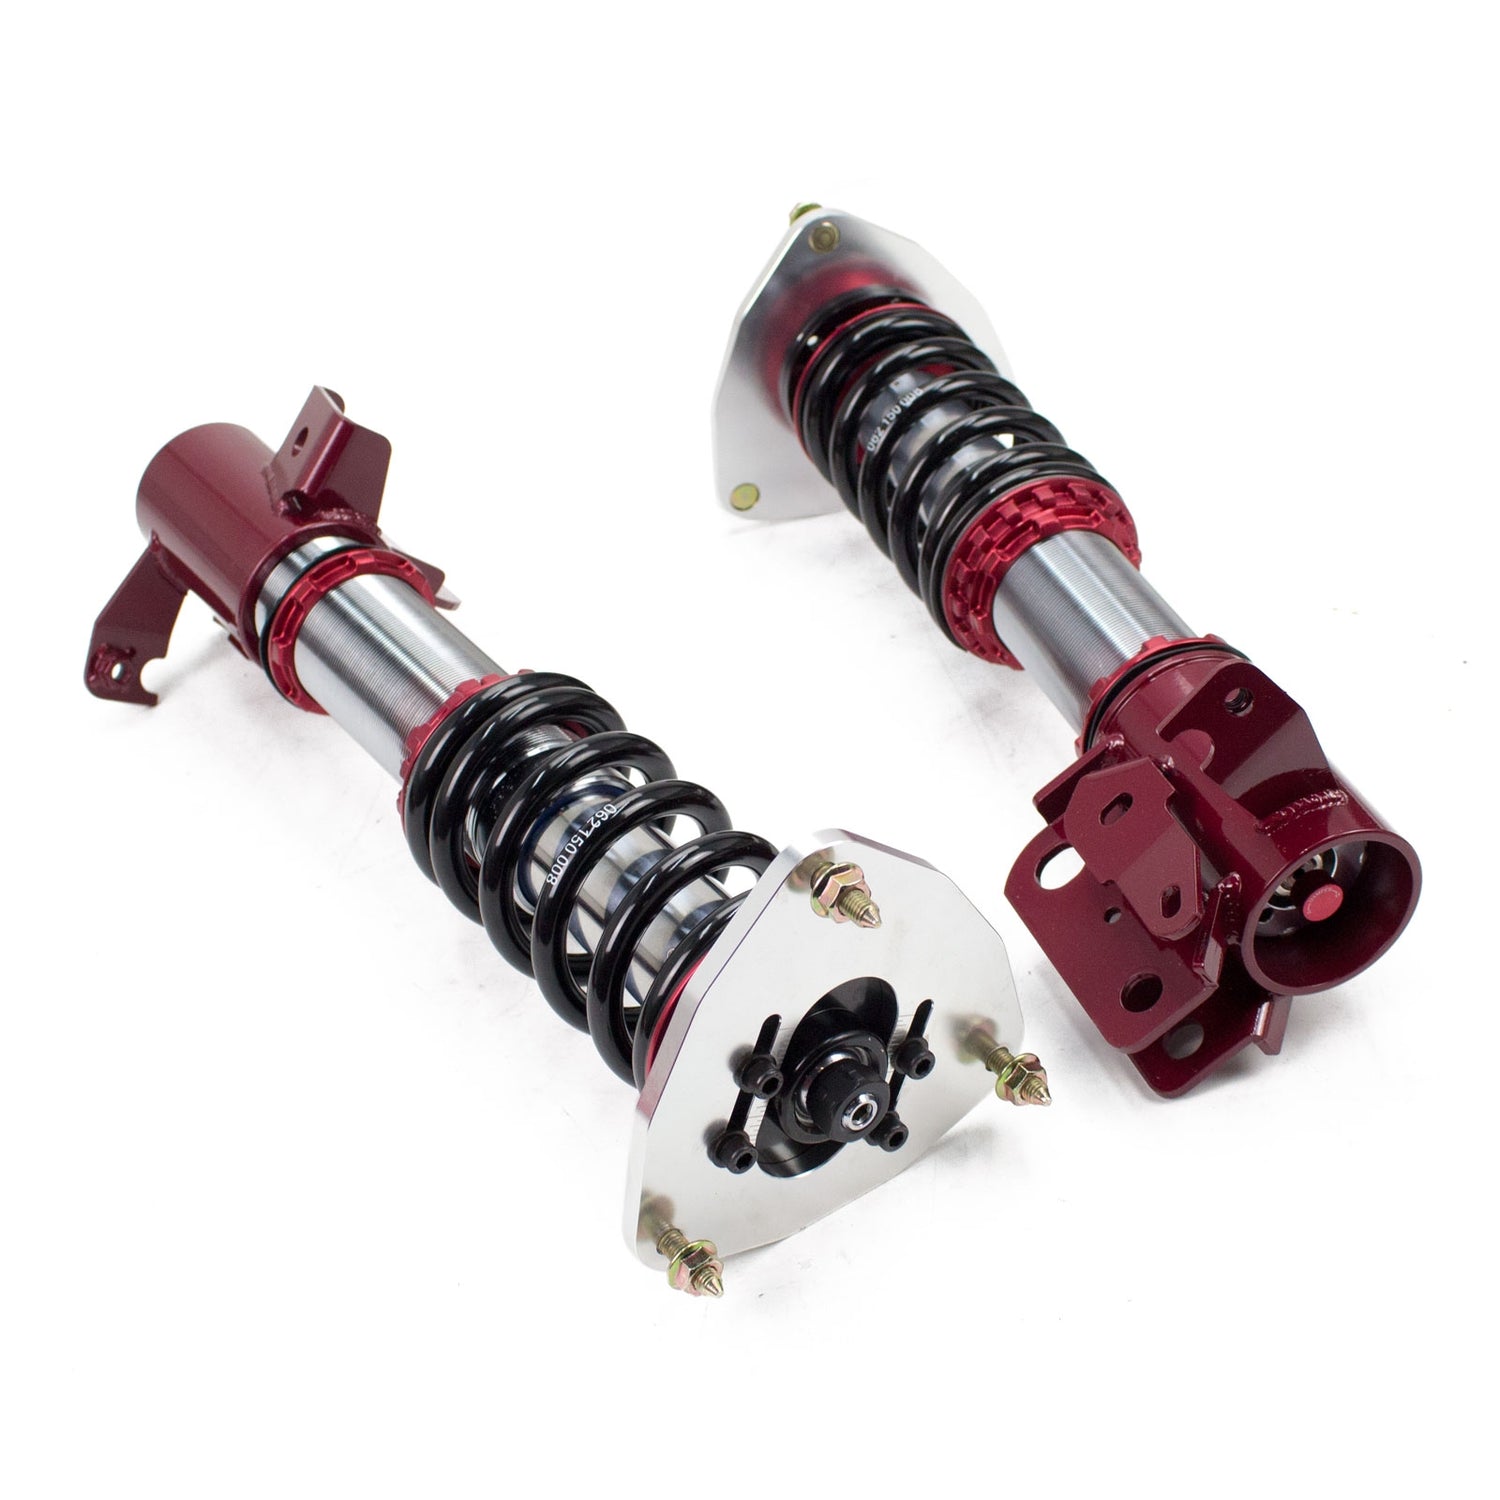 Godspeed(MMXI-7007-A) MAXX SPORTS High Performance Inverted Coilovers Kit, for Subaru BRZ (ZC6) 2013-19